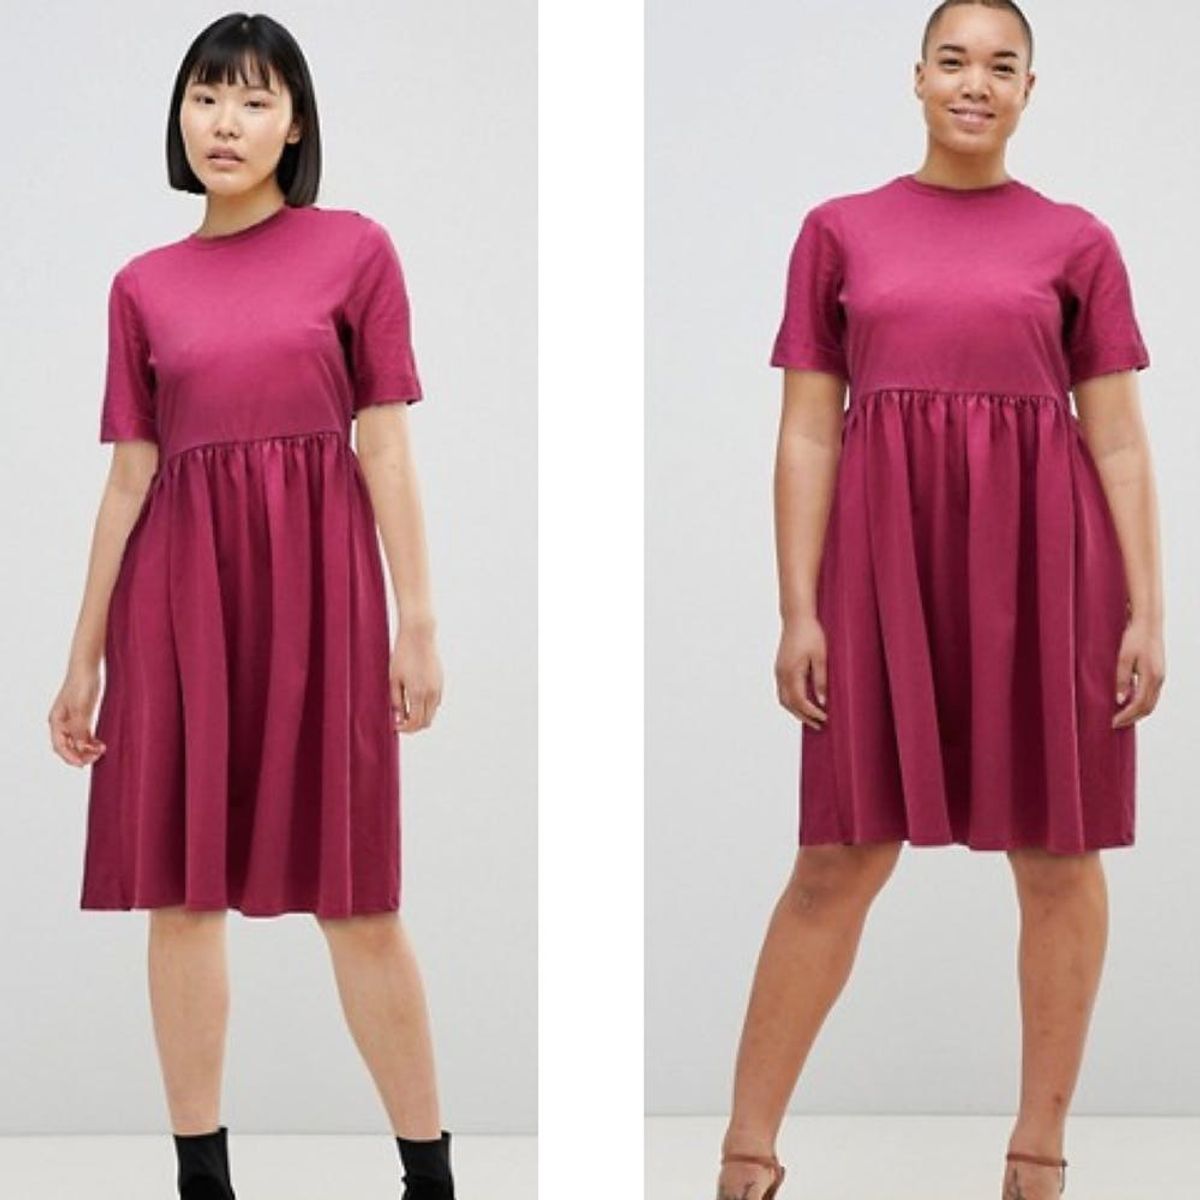 ASOS’ Revolutionary New App Allows You to See How Clothing Looks on Your Body Before You Buy